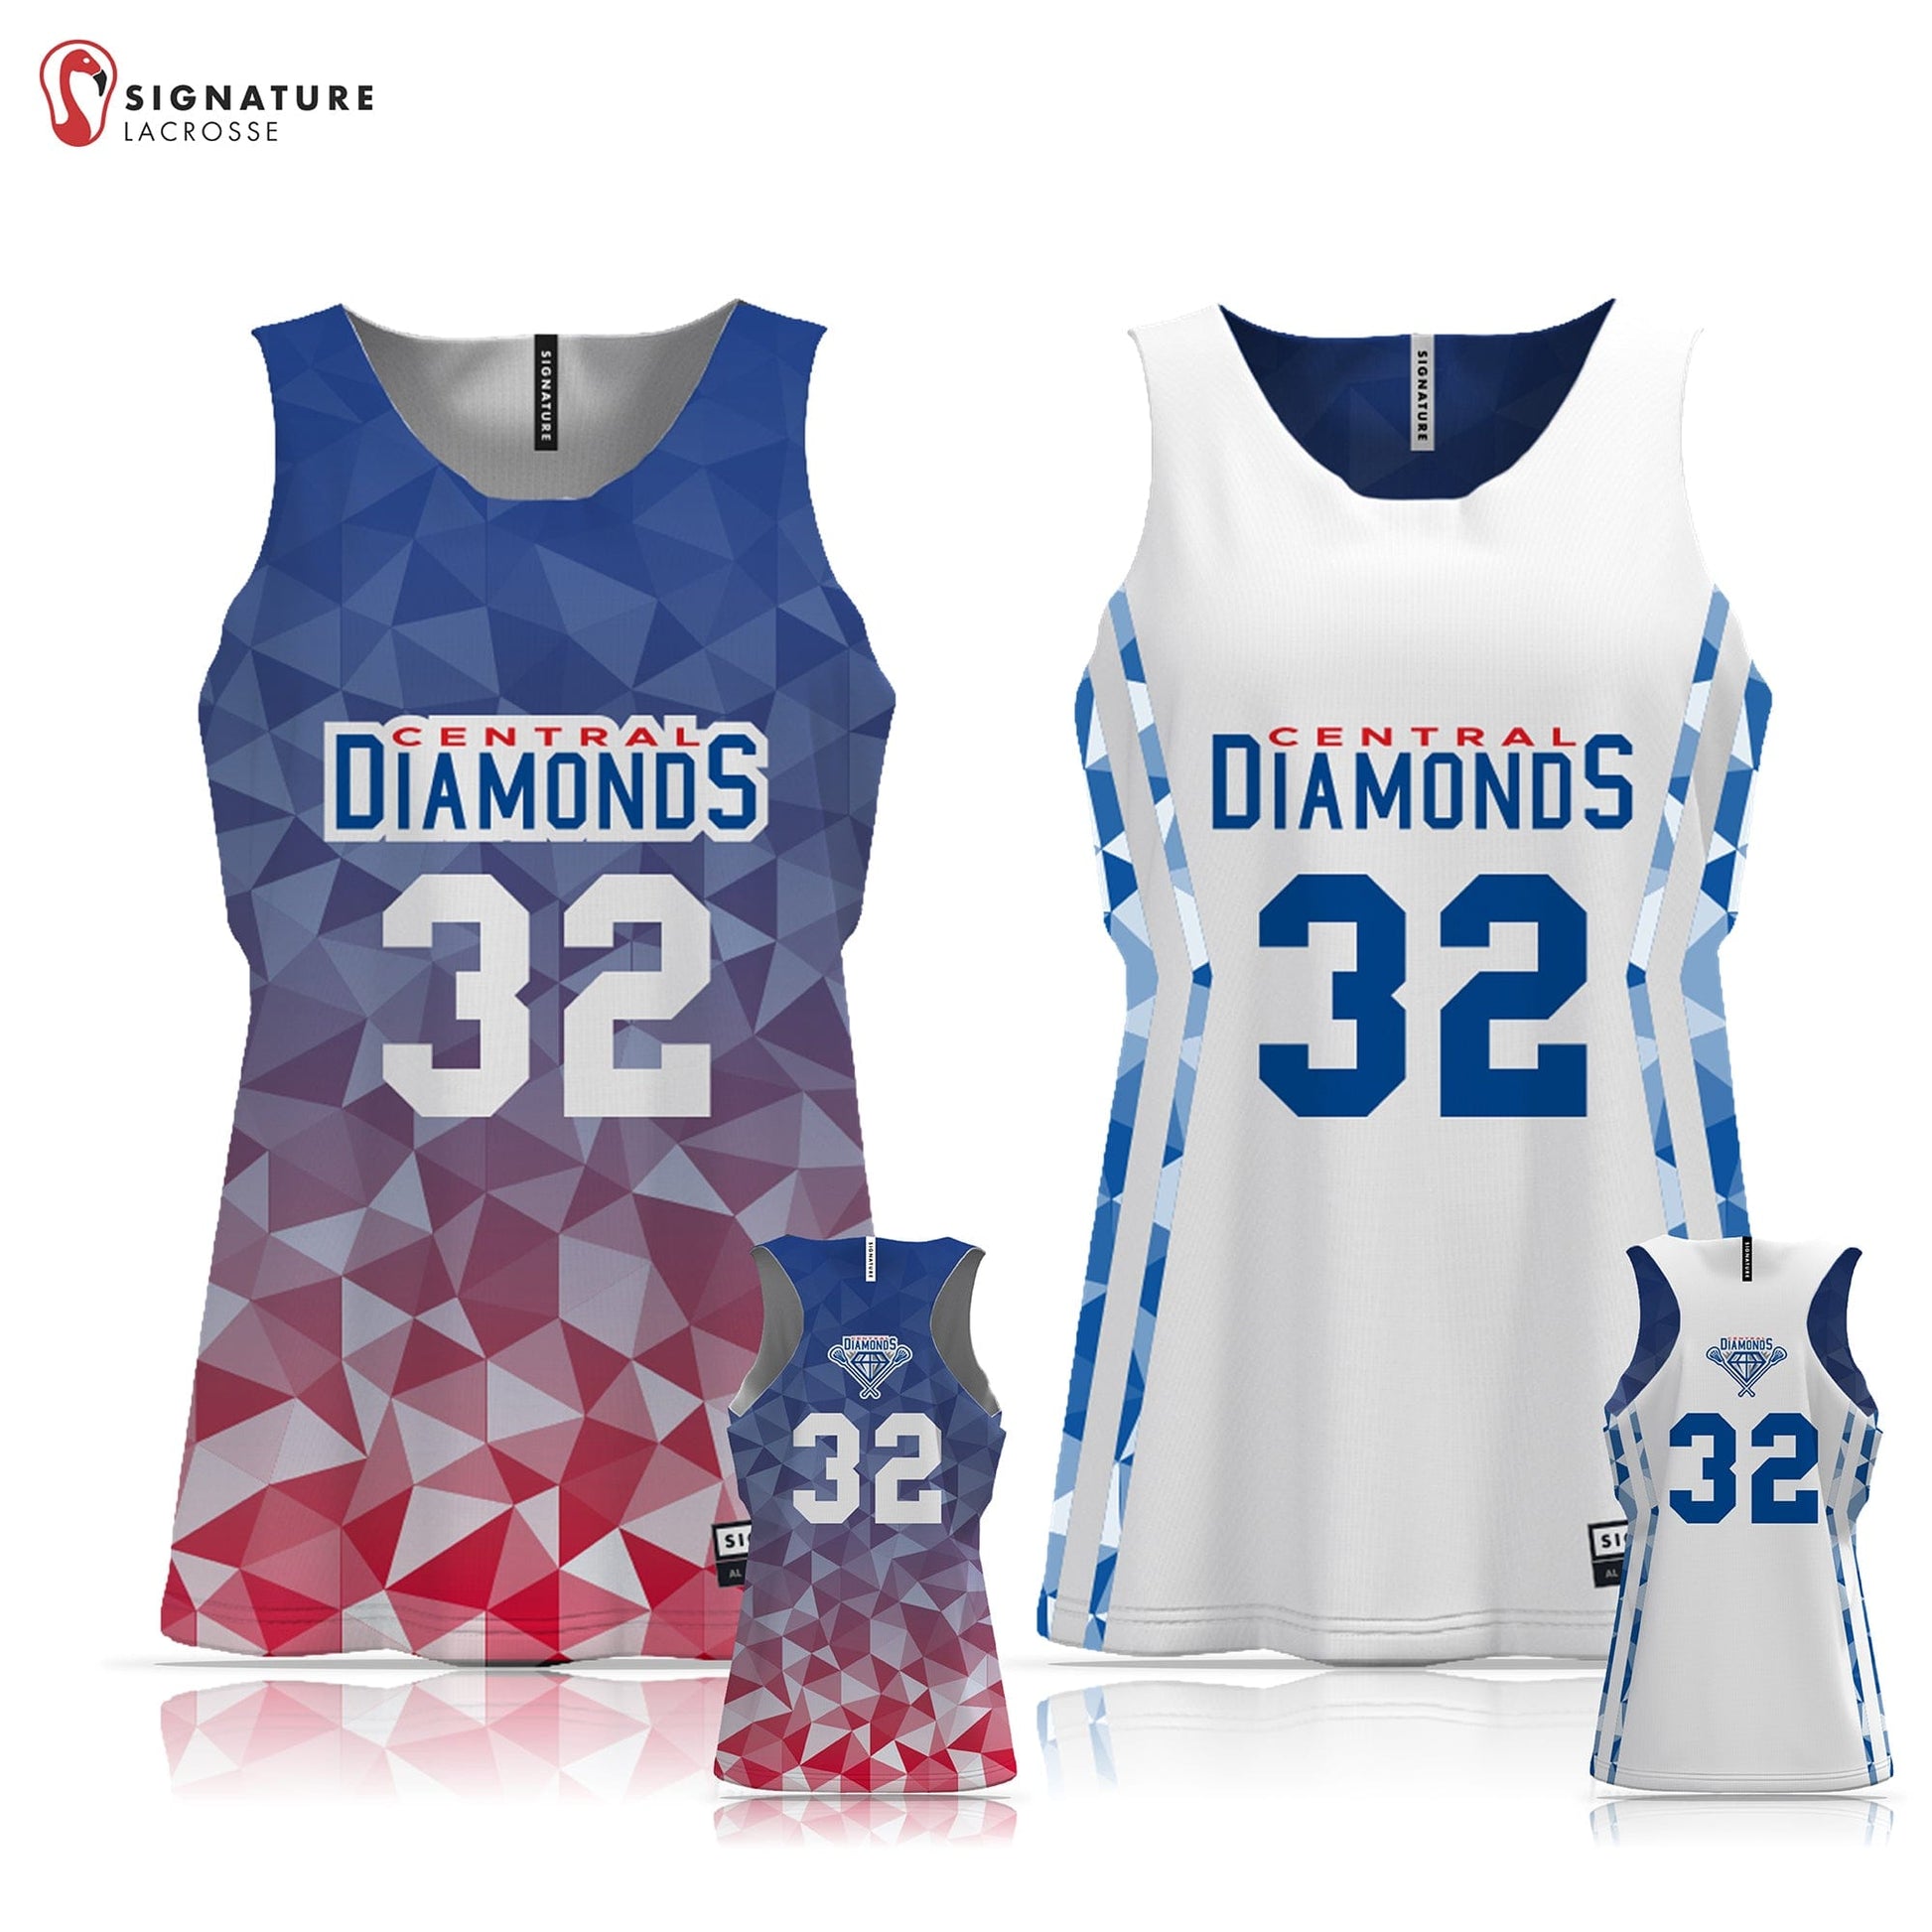 Central Diamonds Women's 3 Piece Pro Game Package with Skirt Signature Lacrosse